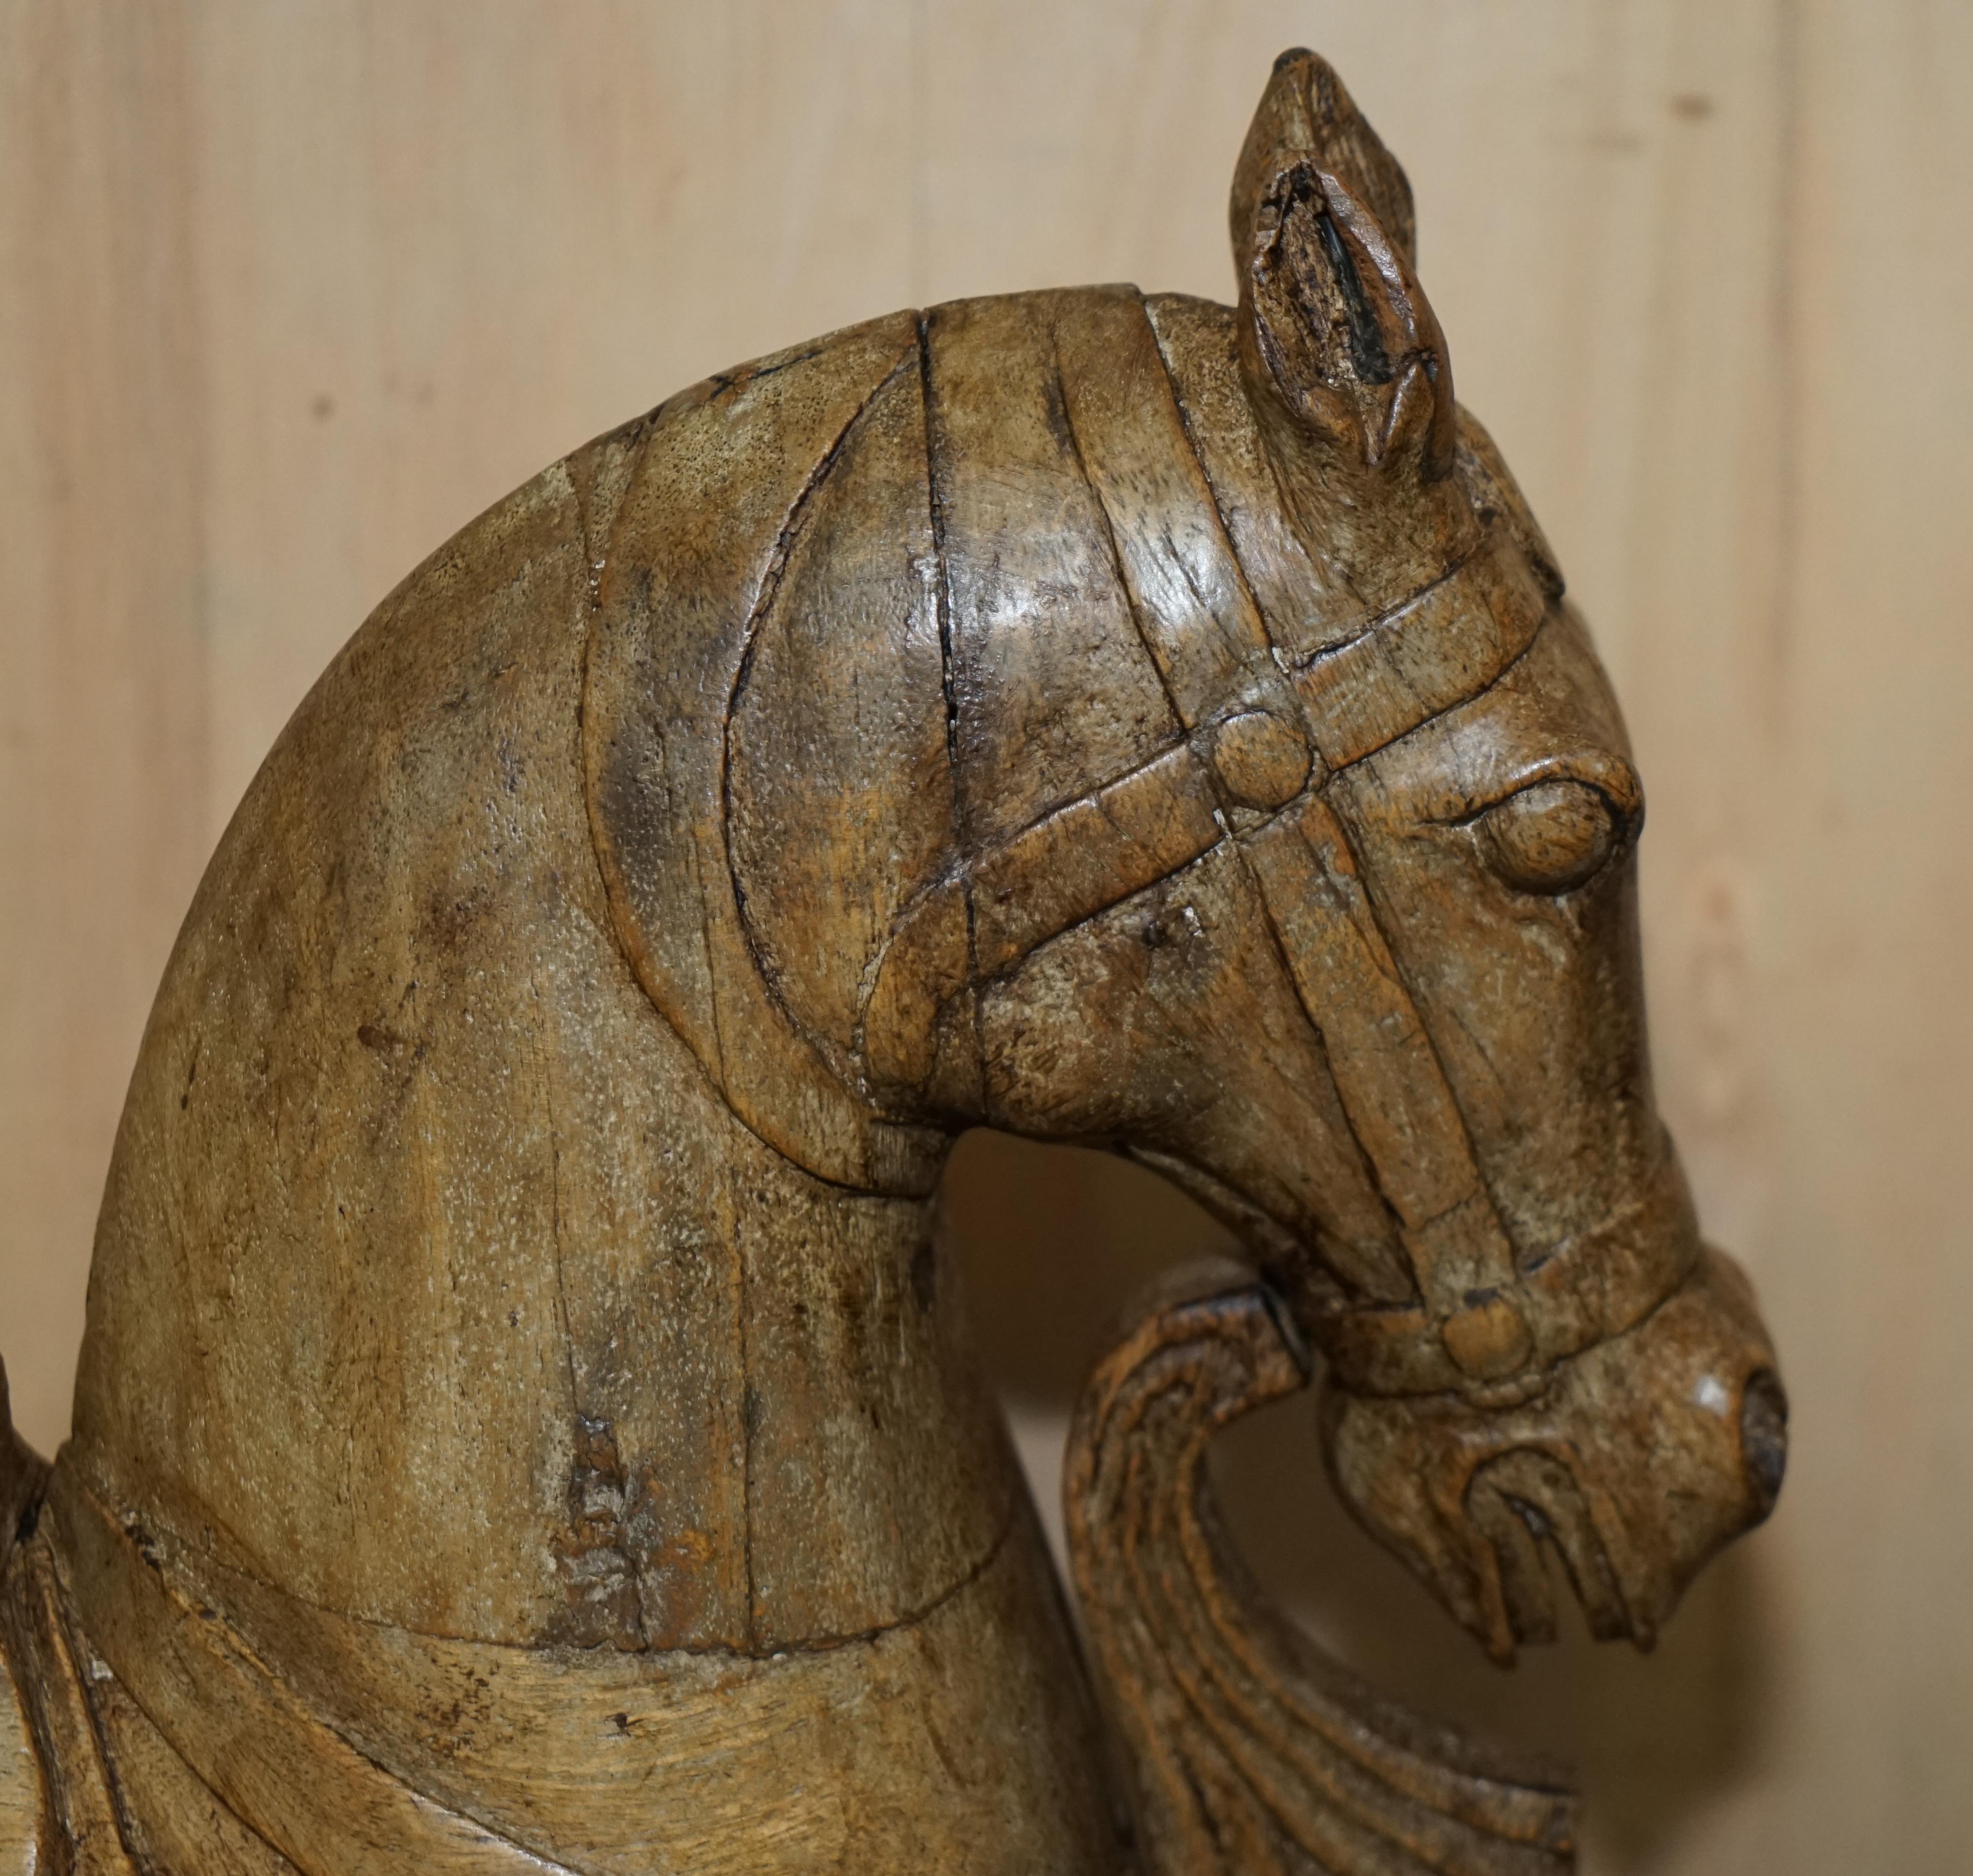 PAiR OF DECORATIVE ANTIQUE HAND CARved WOODEN STATUES OF A LOVELY HORSES (Europäisch) im Angebot